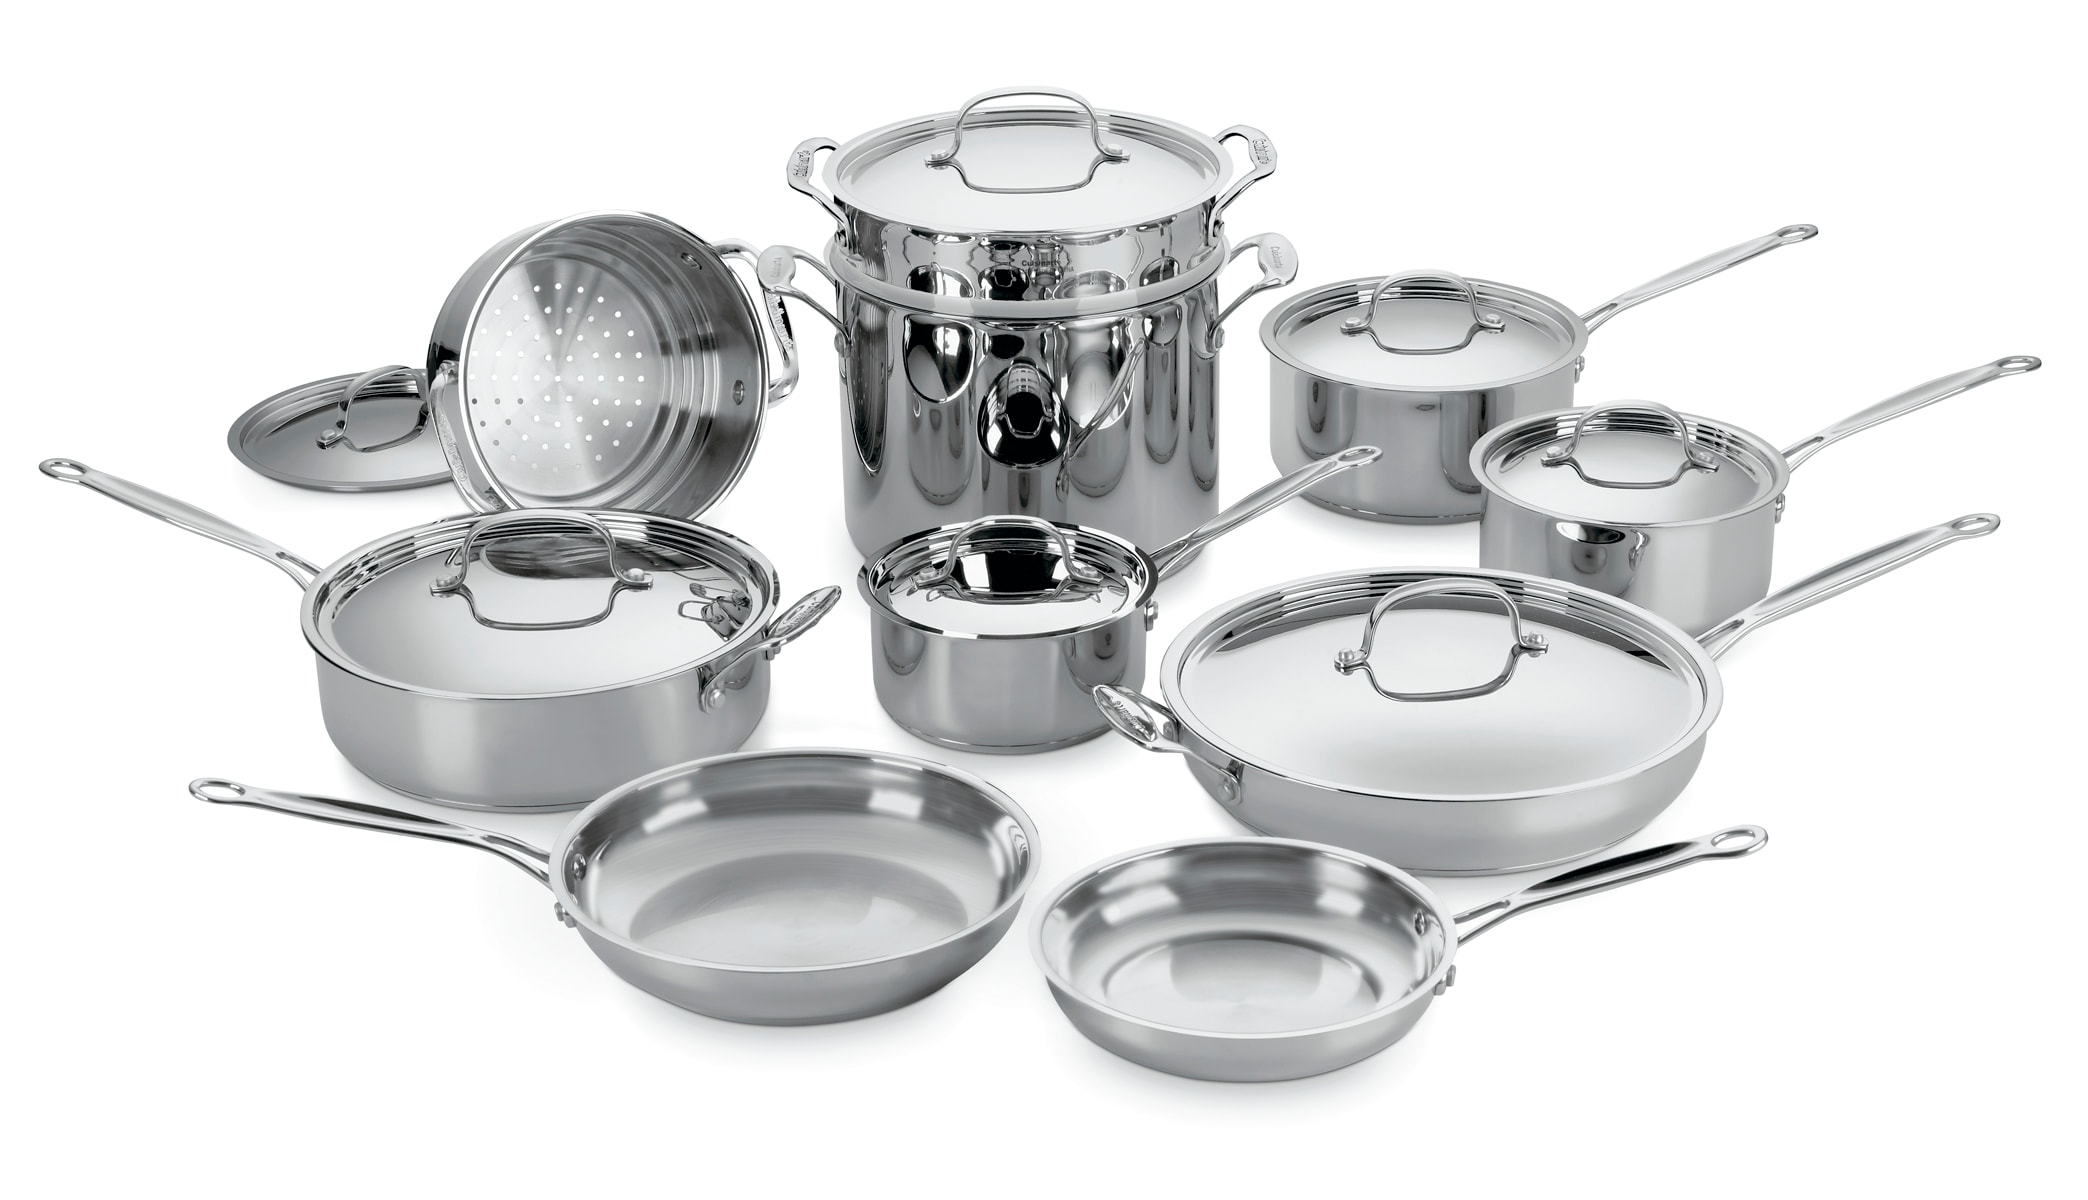 Cuisinart 17-Piece Chef's Classic Aluminum Cookware Set with Lids at